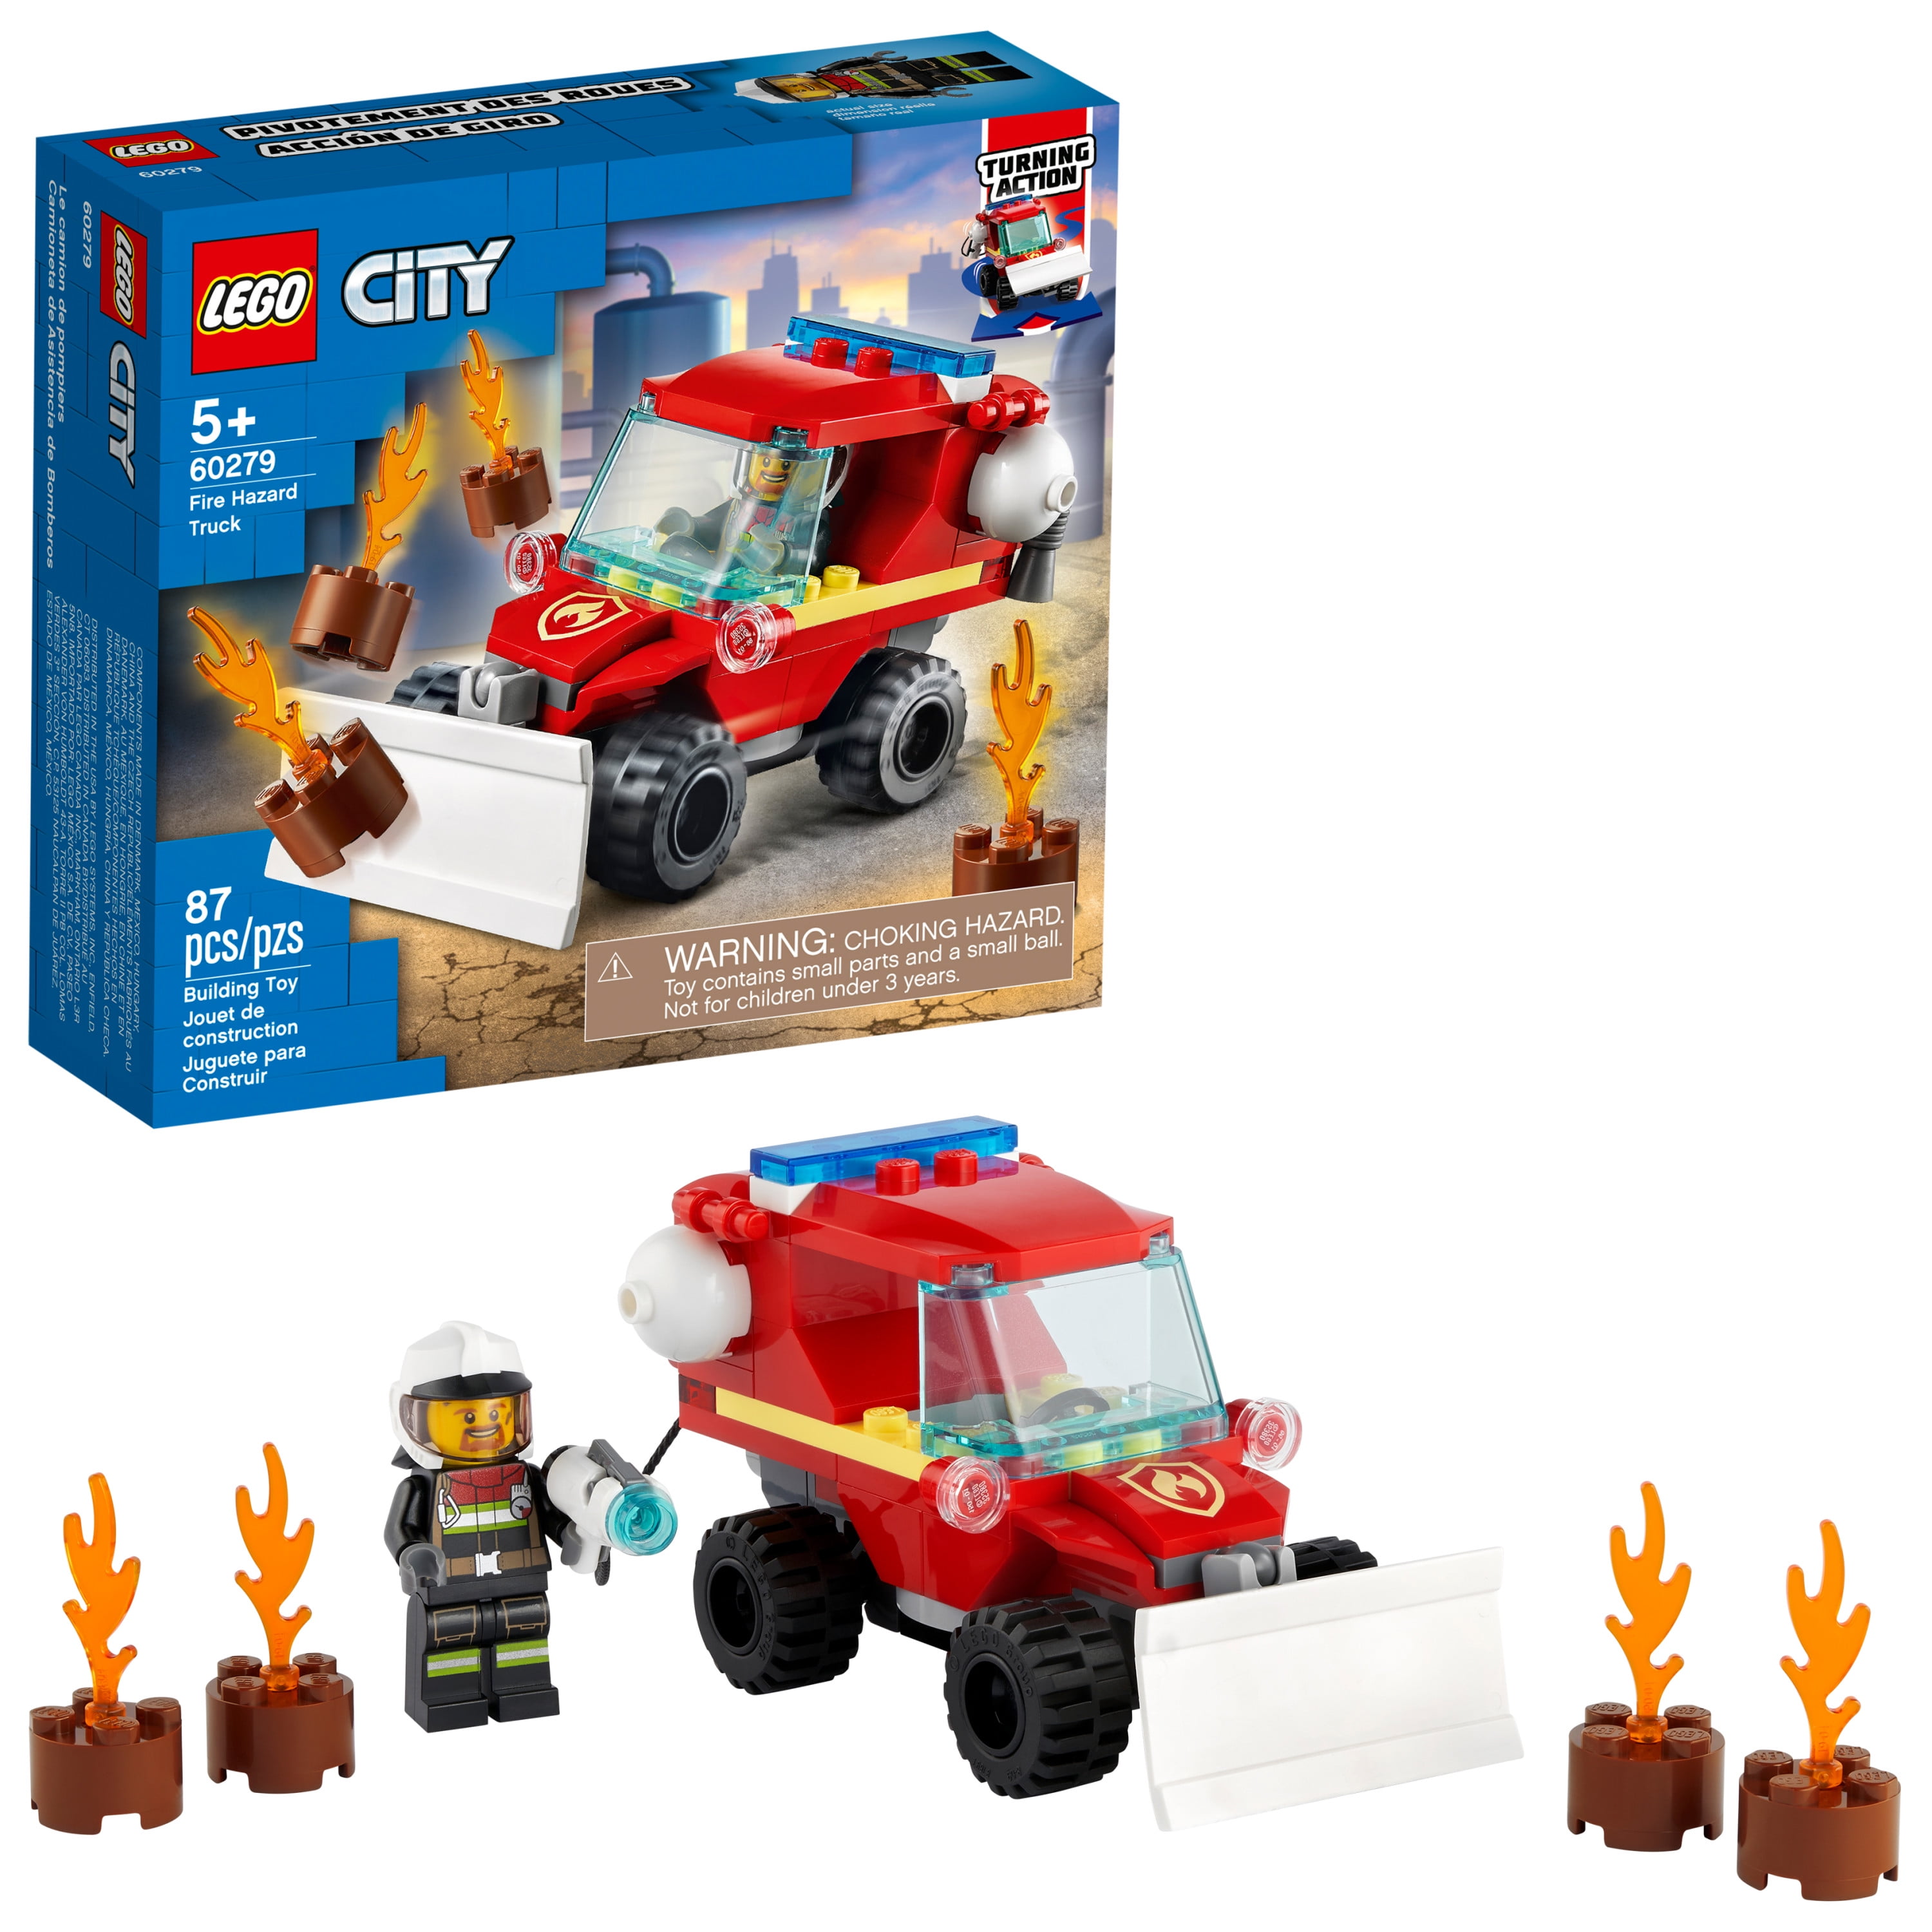 kapacitet Afstemning At dræbe LEGO City Fire Hazard Truck 60279 Building Kit; Firefighter Toy That Makes  a Cool Building Toy for Kids, New 2021 (87 Pieces) - Walmart.com